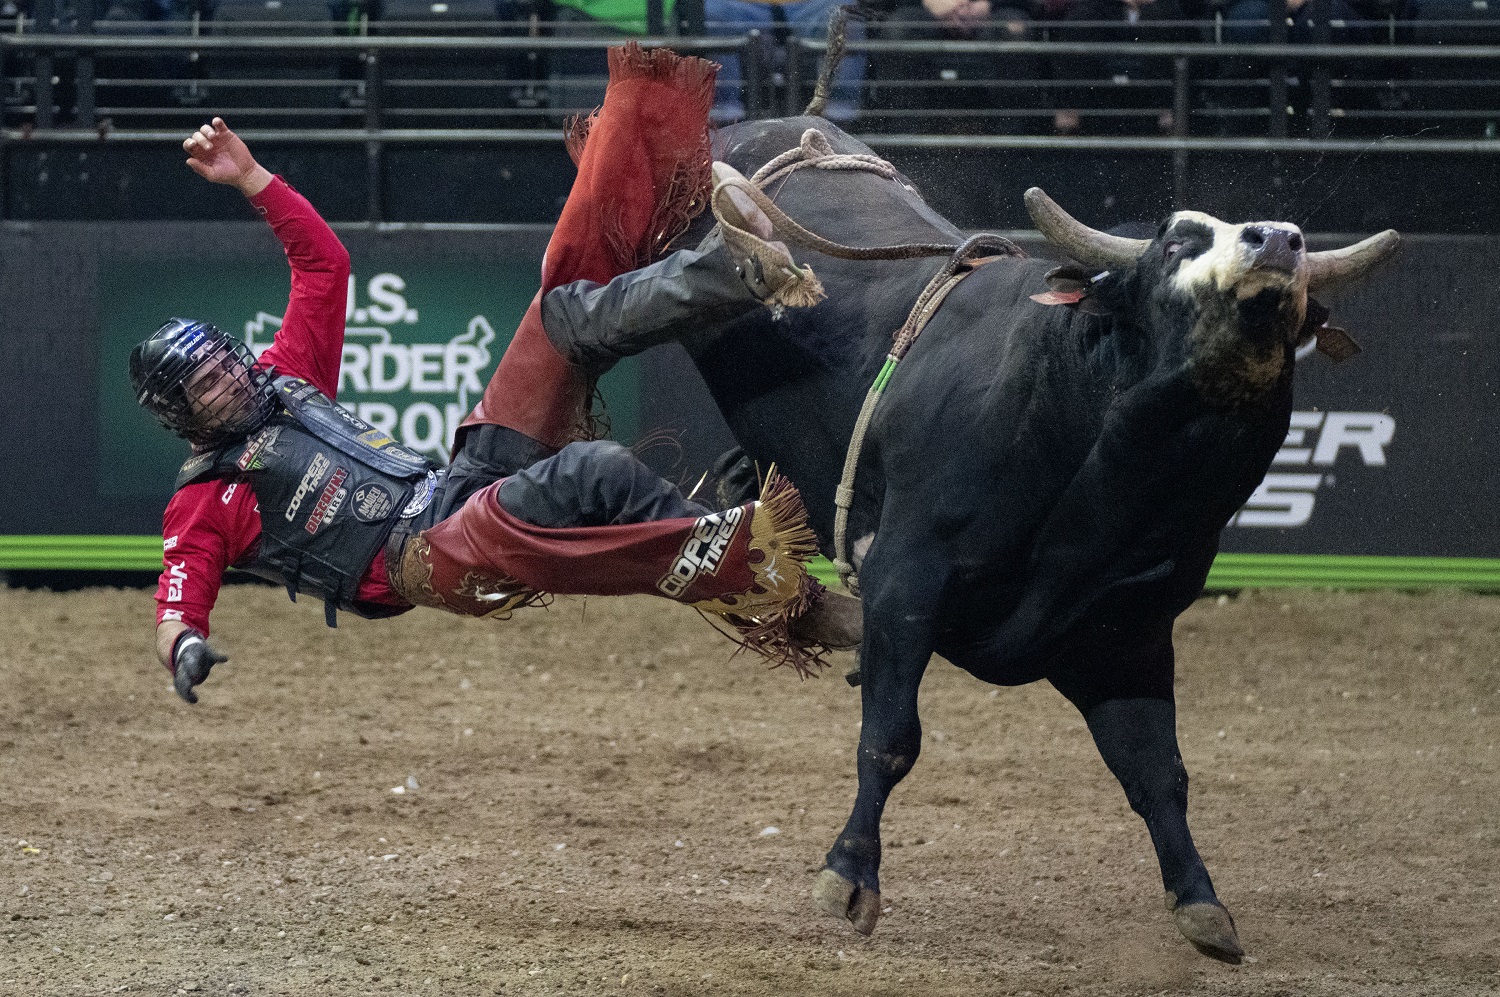 Silvano Alves is bucked off a bull during the Professional Bull Riders (PBR) Minneapolis Invitational on Dec. 10, 2022 at Target Center. | Alex Kormann/Star Tribune via Getty Images)